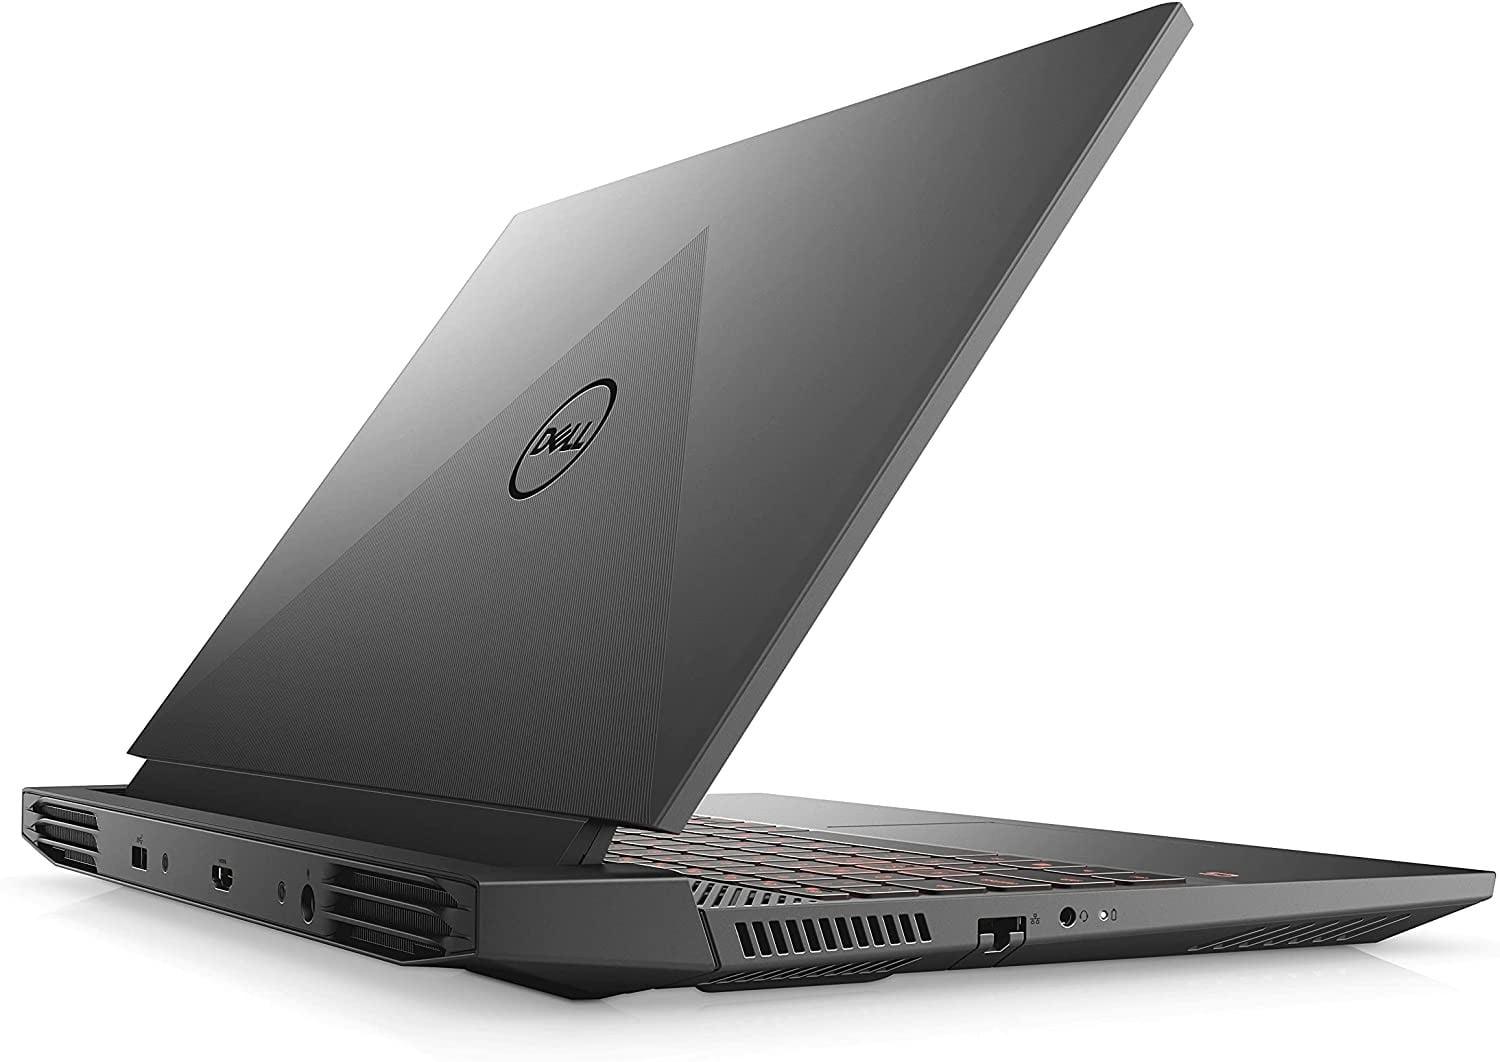 Dell G15 15.6in i5 8GB 512GB Gaming Notebook Laptop for $734.99 Shipped